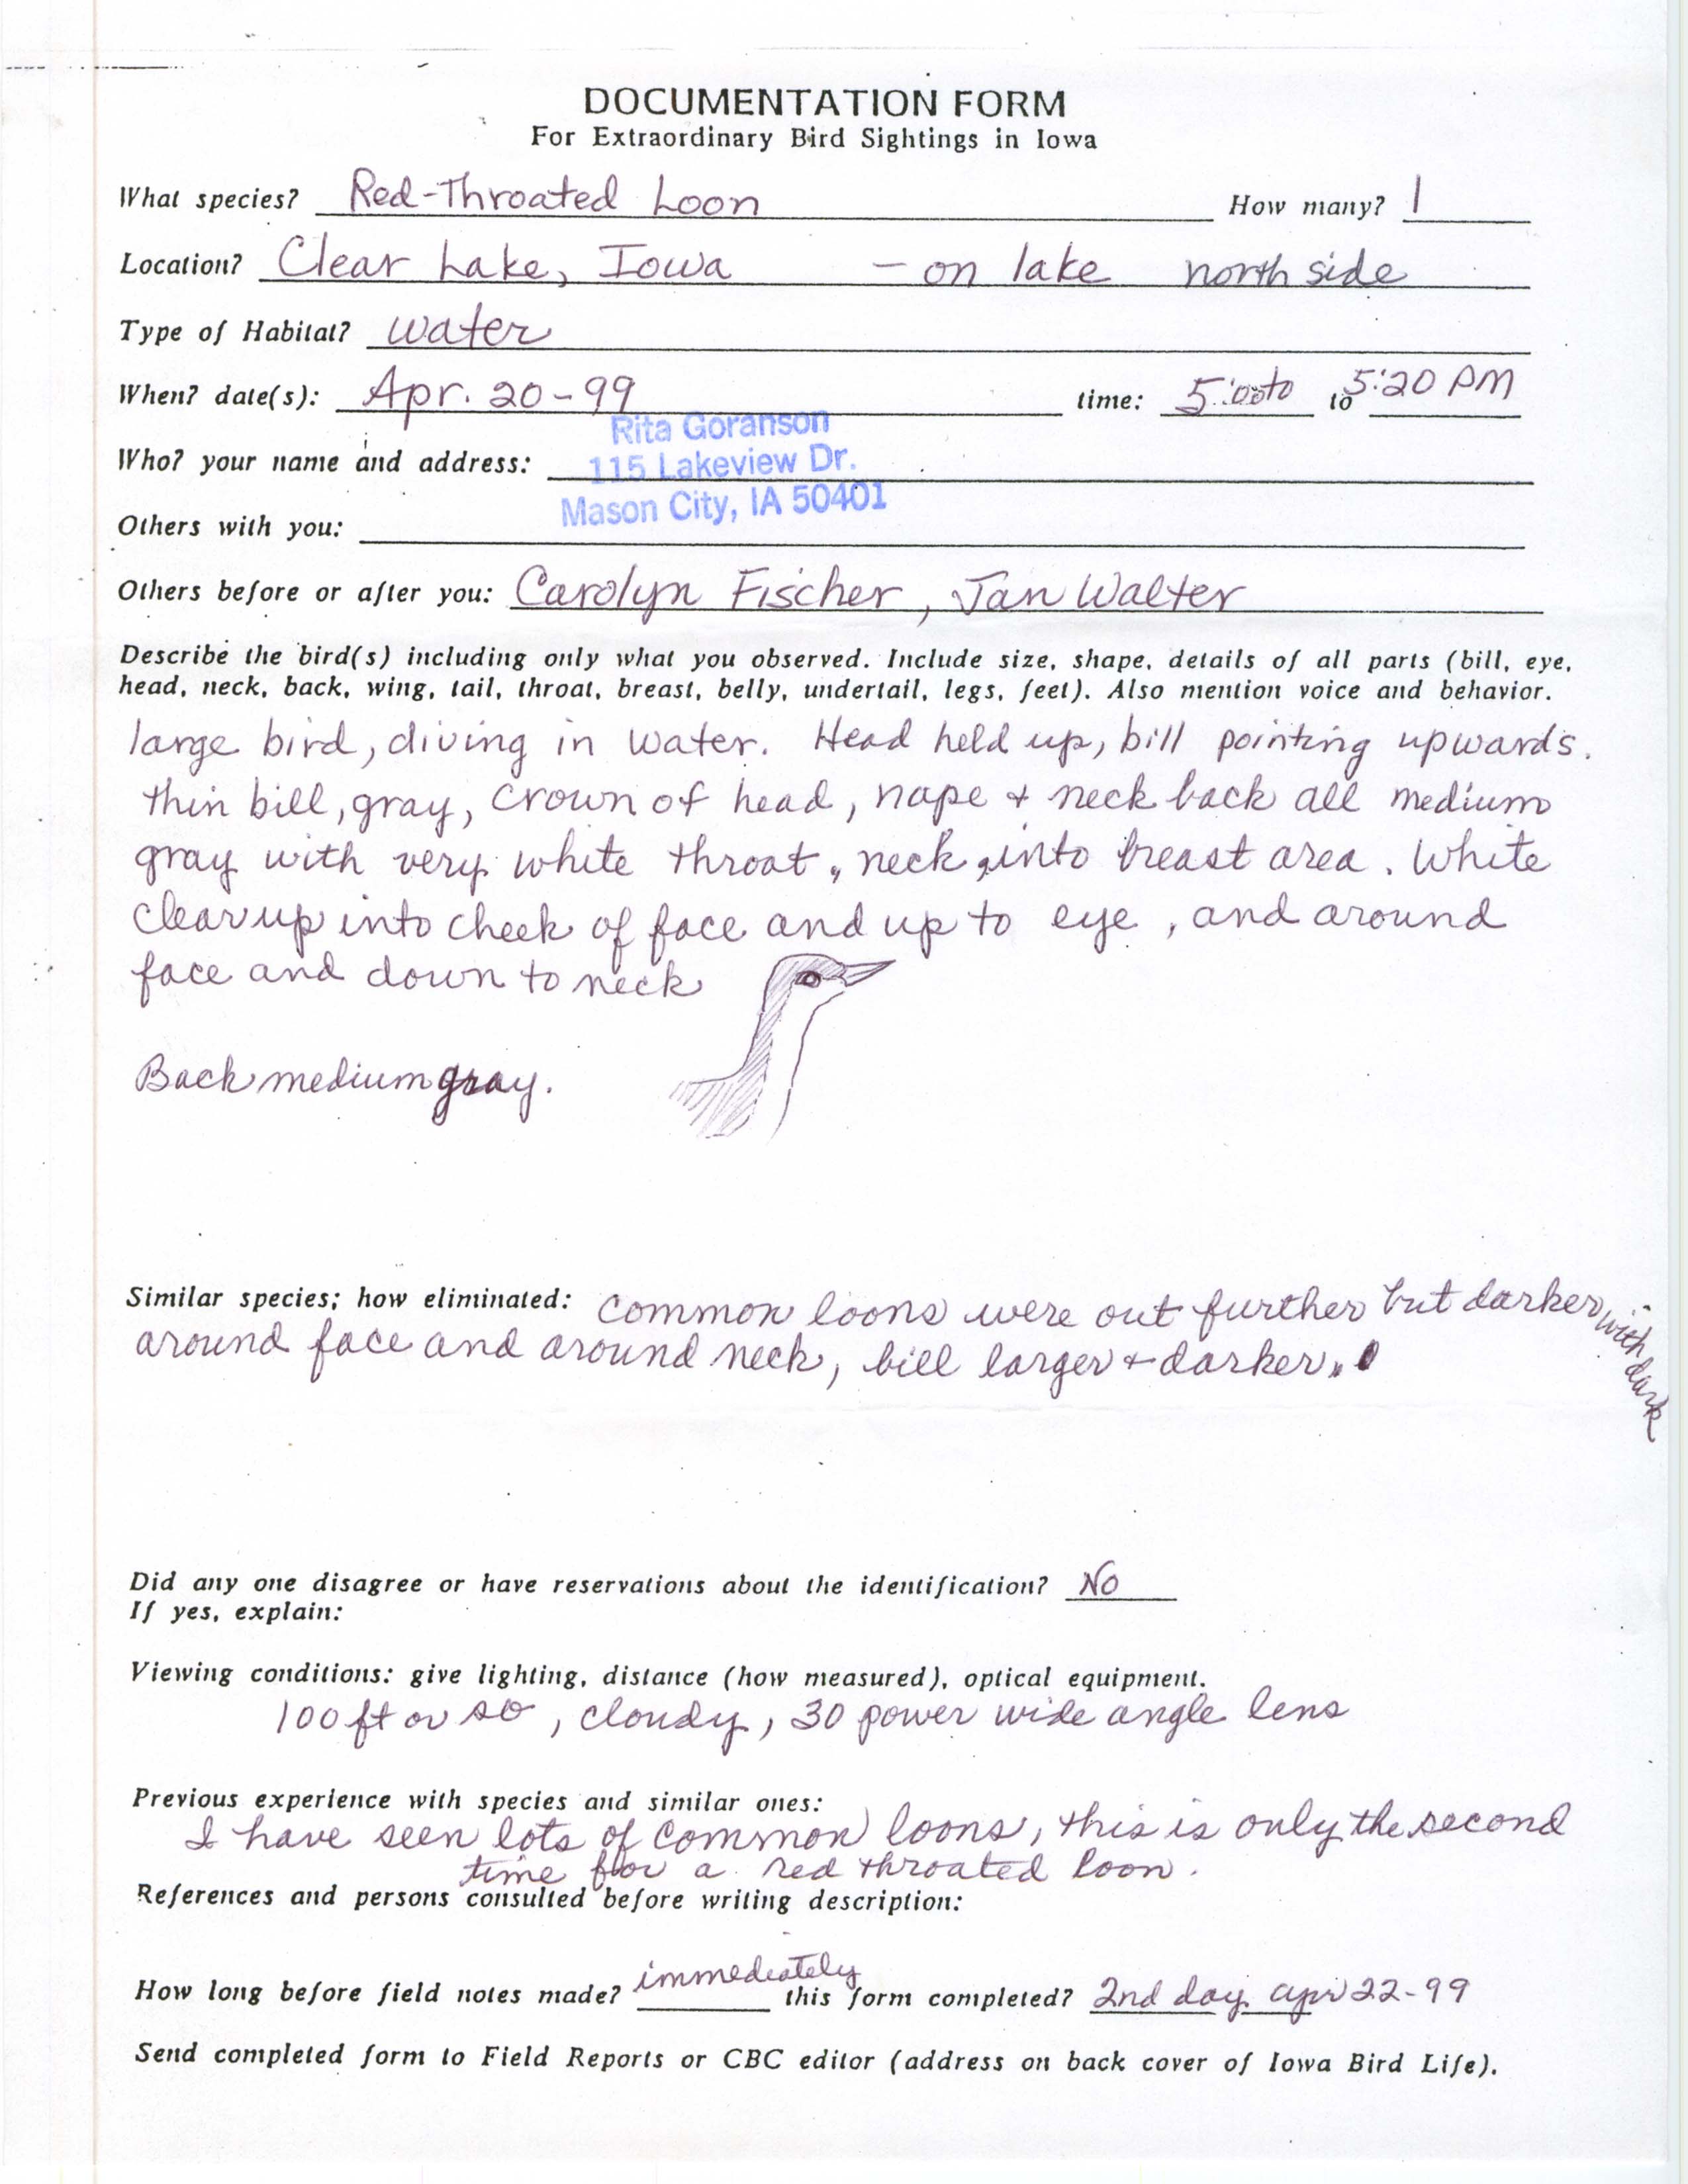 Rare bird documentation form for Red-throated Loon at Clear Lake, 1999